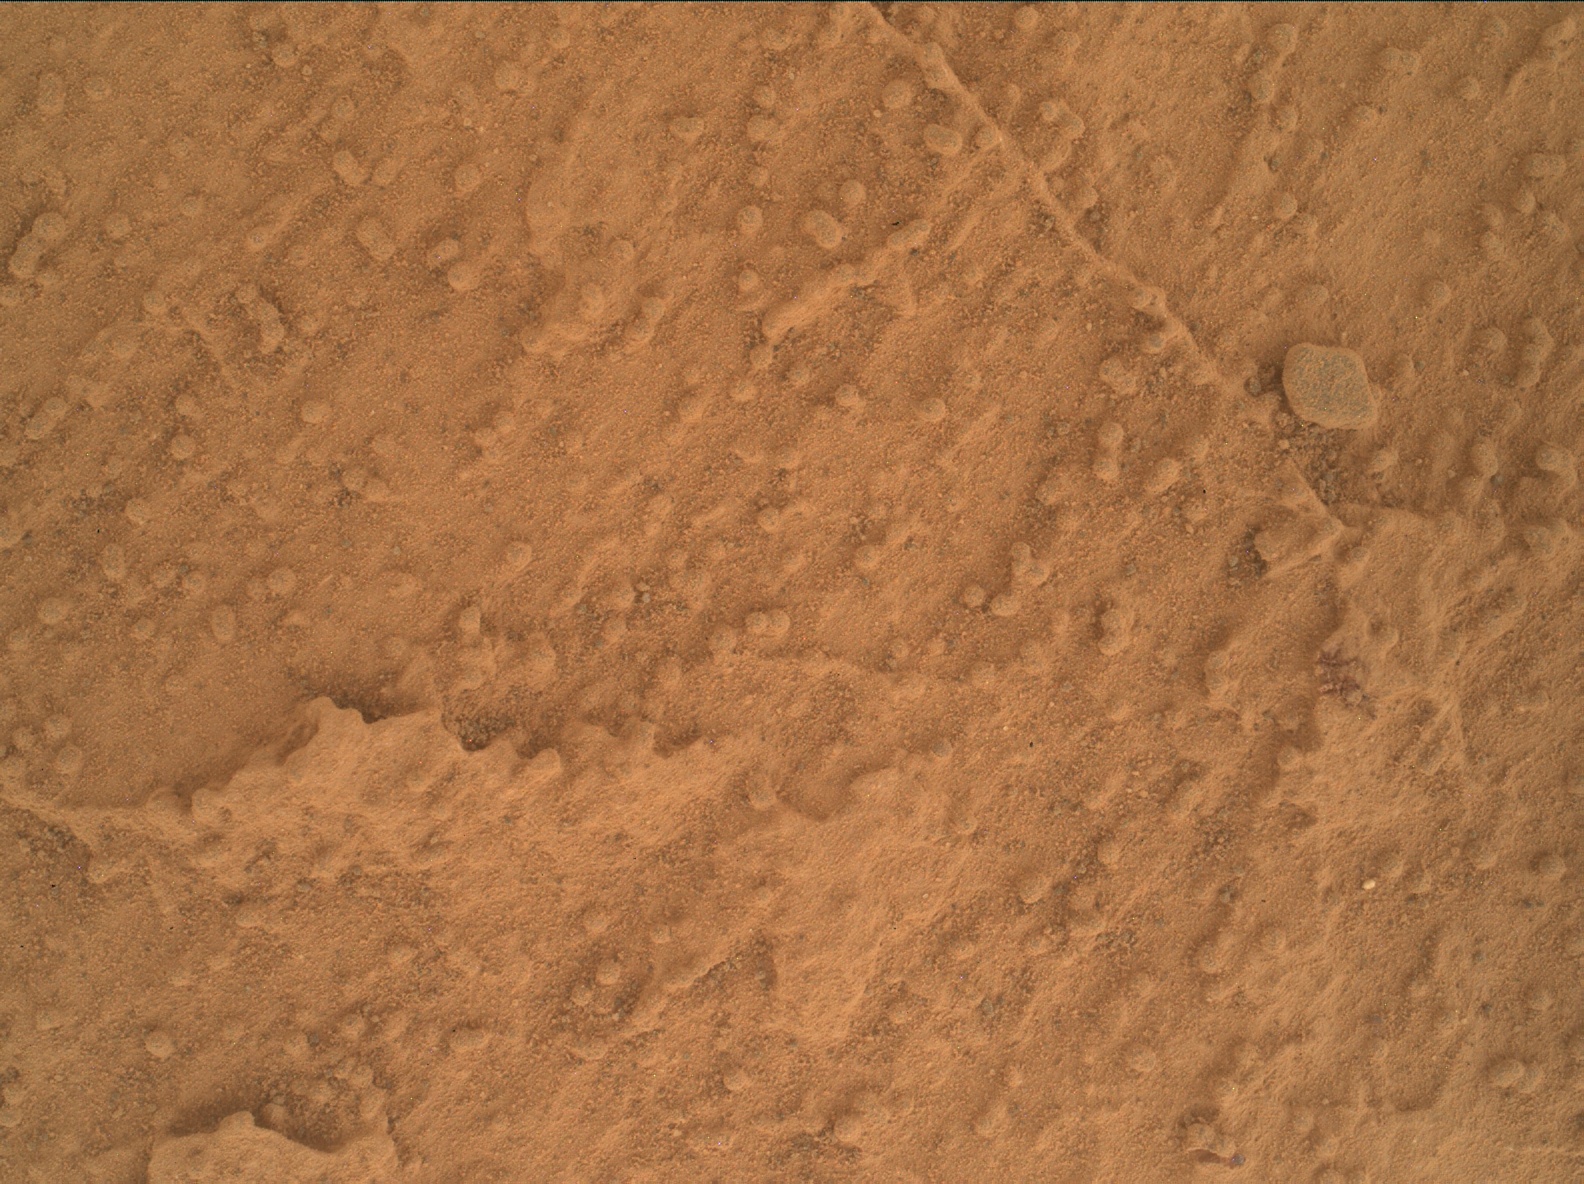 Nasa's Mars rover Curiosity acquired this image using its Mars Hand Lens Imager (MAHLI) on Sol 3456